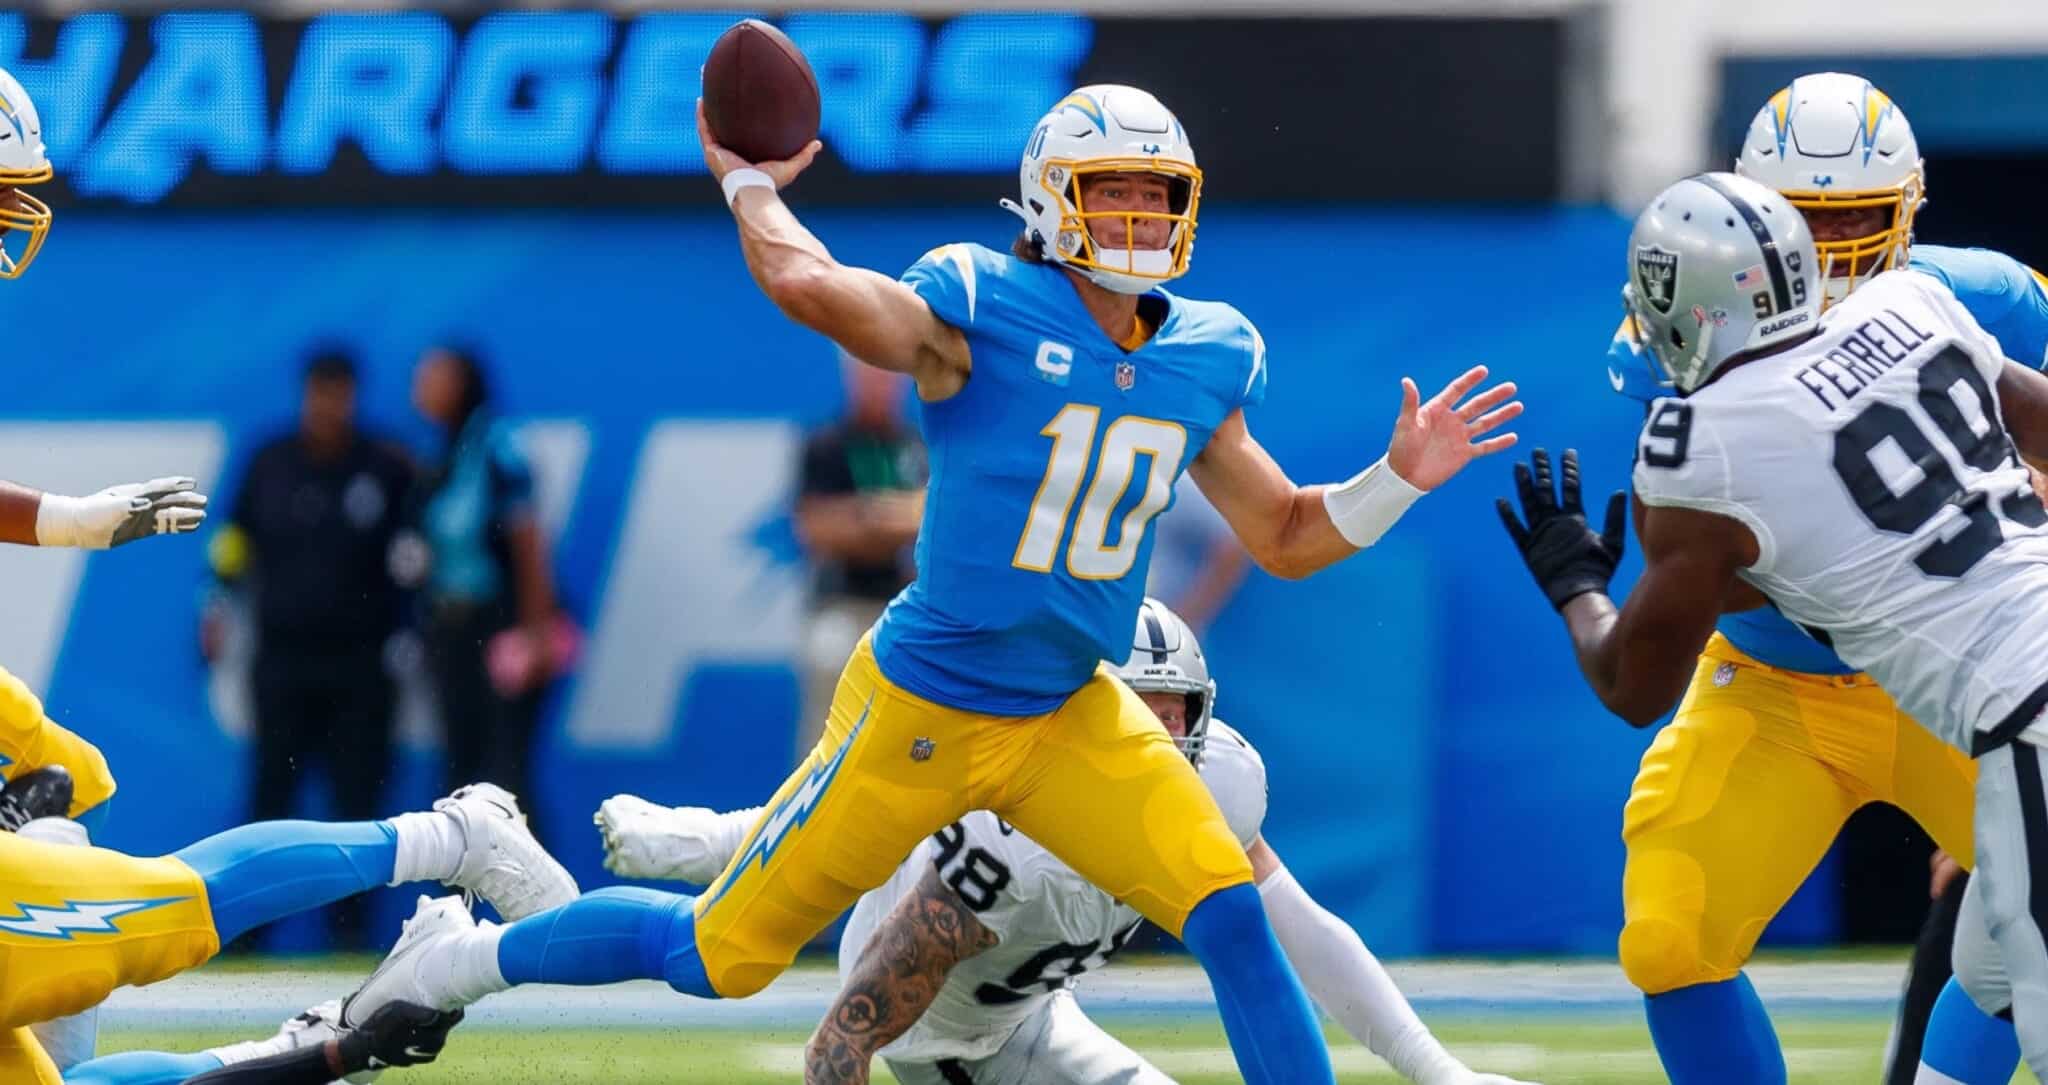 Chargers News: 3 thoughts following Chargers' first 2 preseason games -  Bolts From The Blue